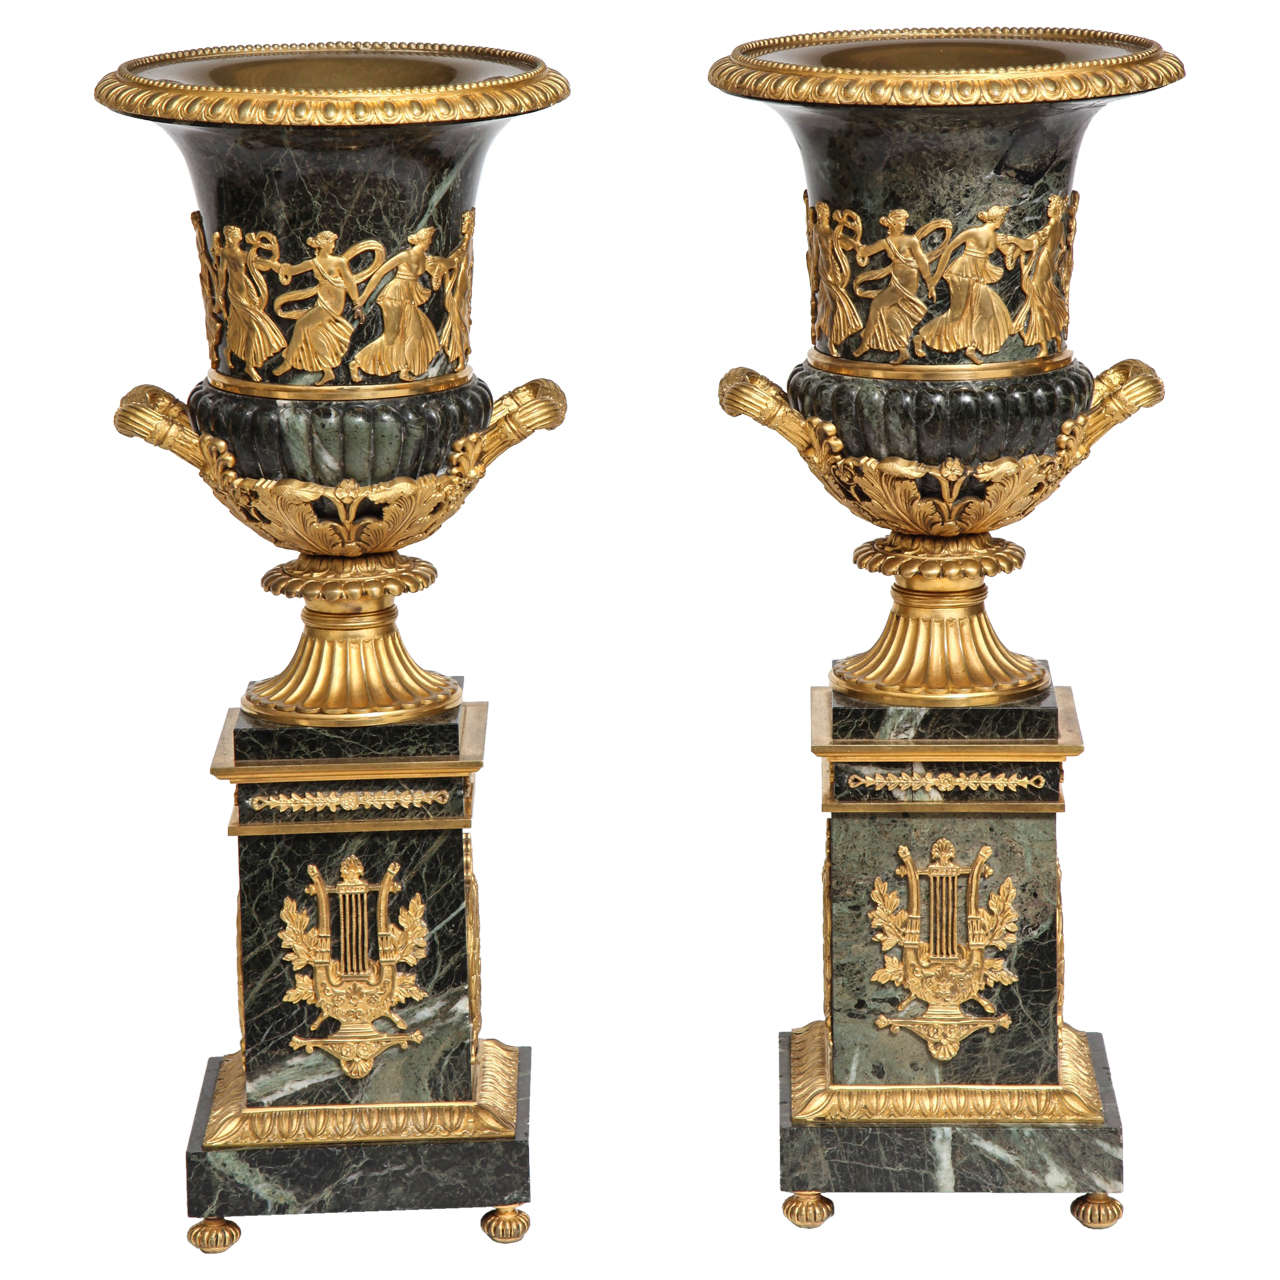 Pair of Antique French Neoclassical Verde Antico Marble and Ormolu-Mounted Urns For Sale